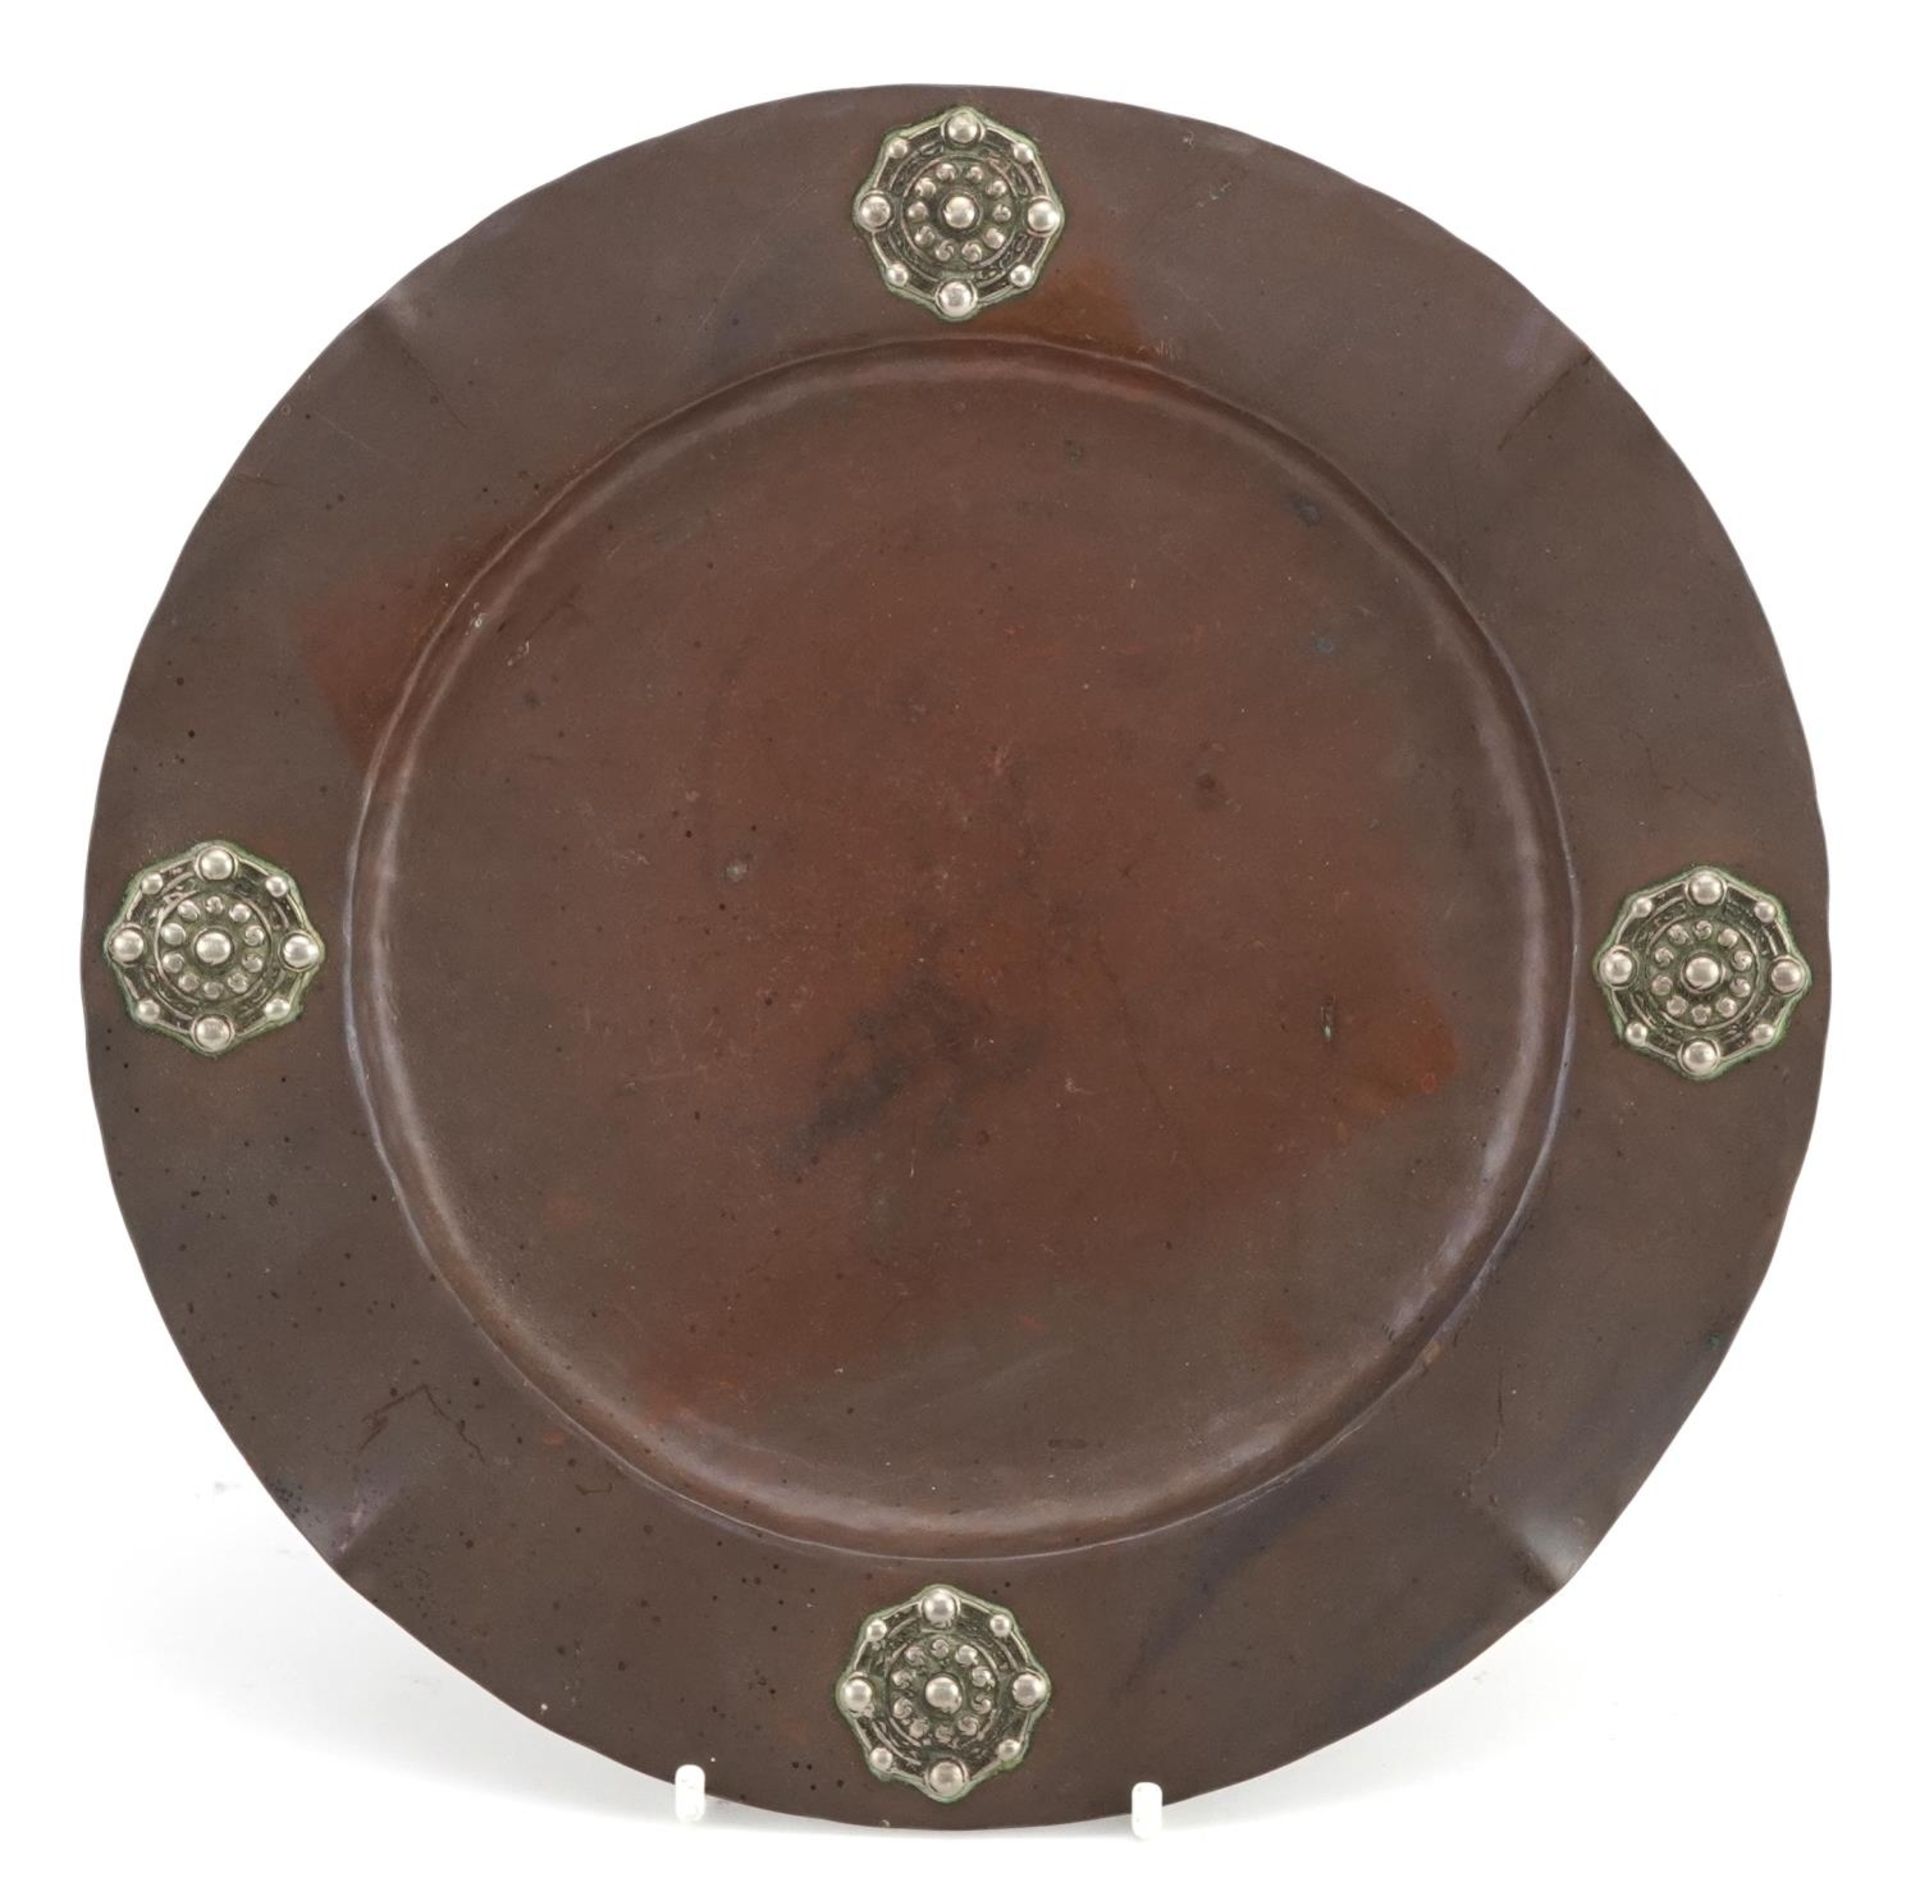 Iona, Arts & Crafts copper dish with applied silver medallions, 23cm in diameter : For further